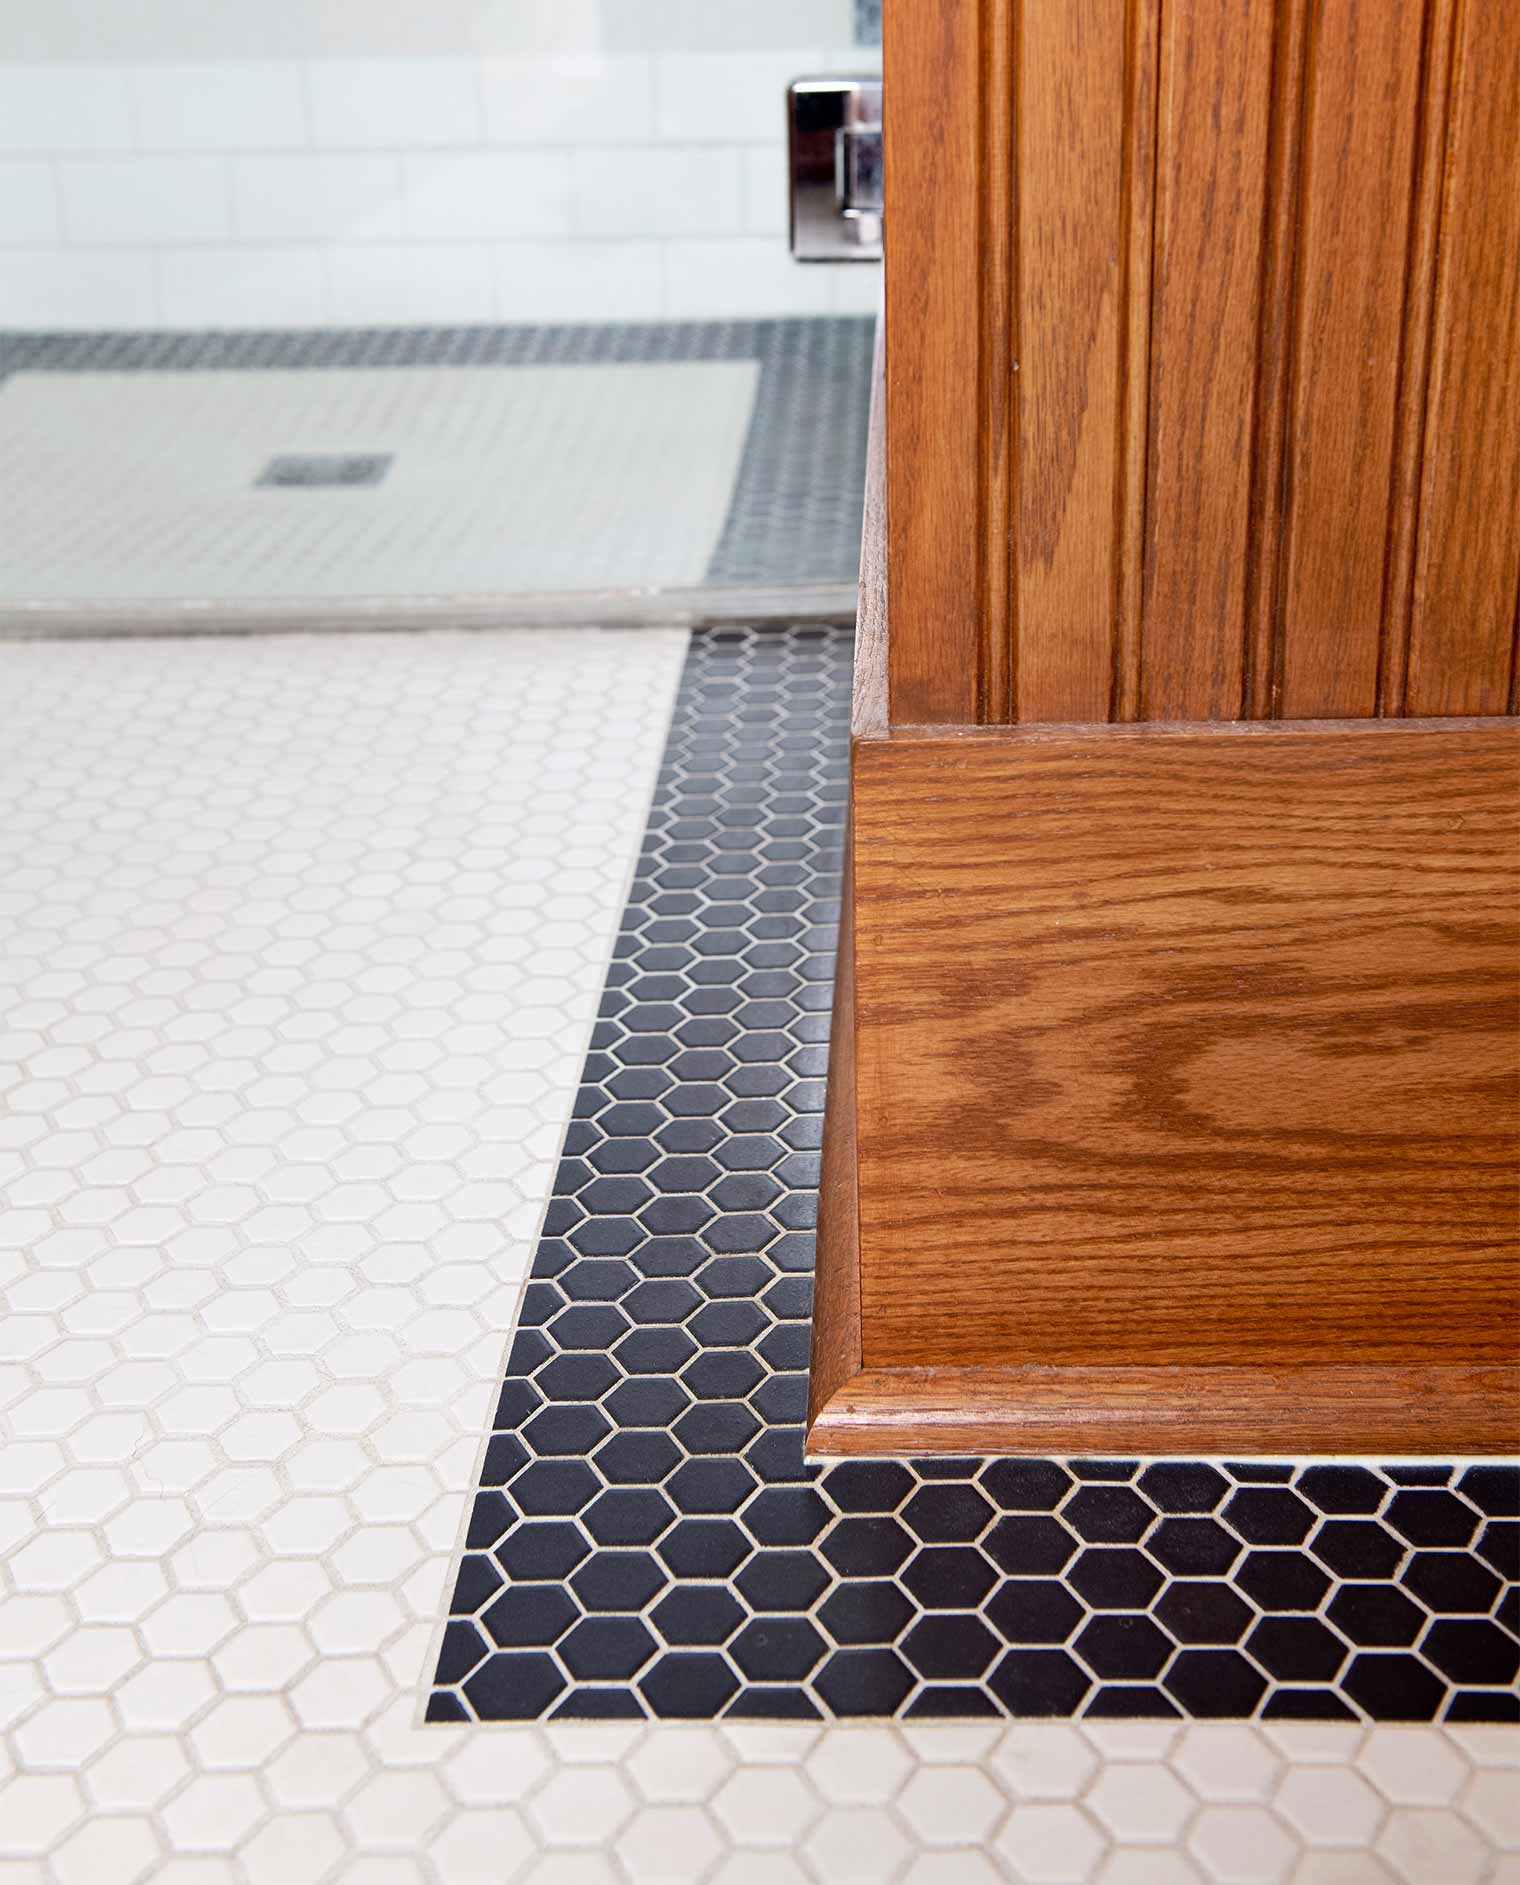 bathroom remodel in a Des Moines Victorian home renovation by Silent Rivers features hexagon tile